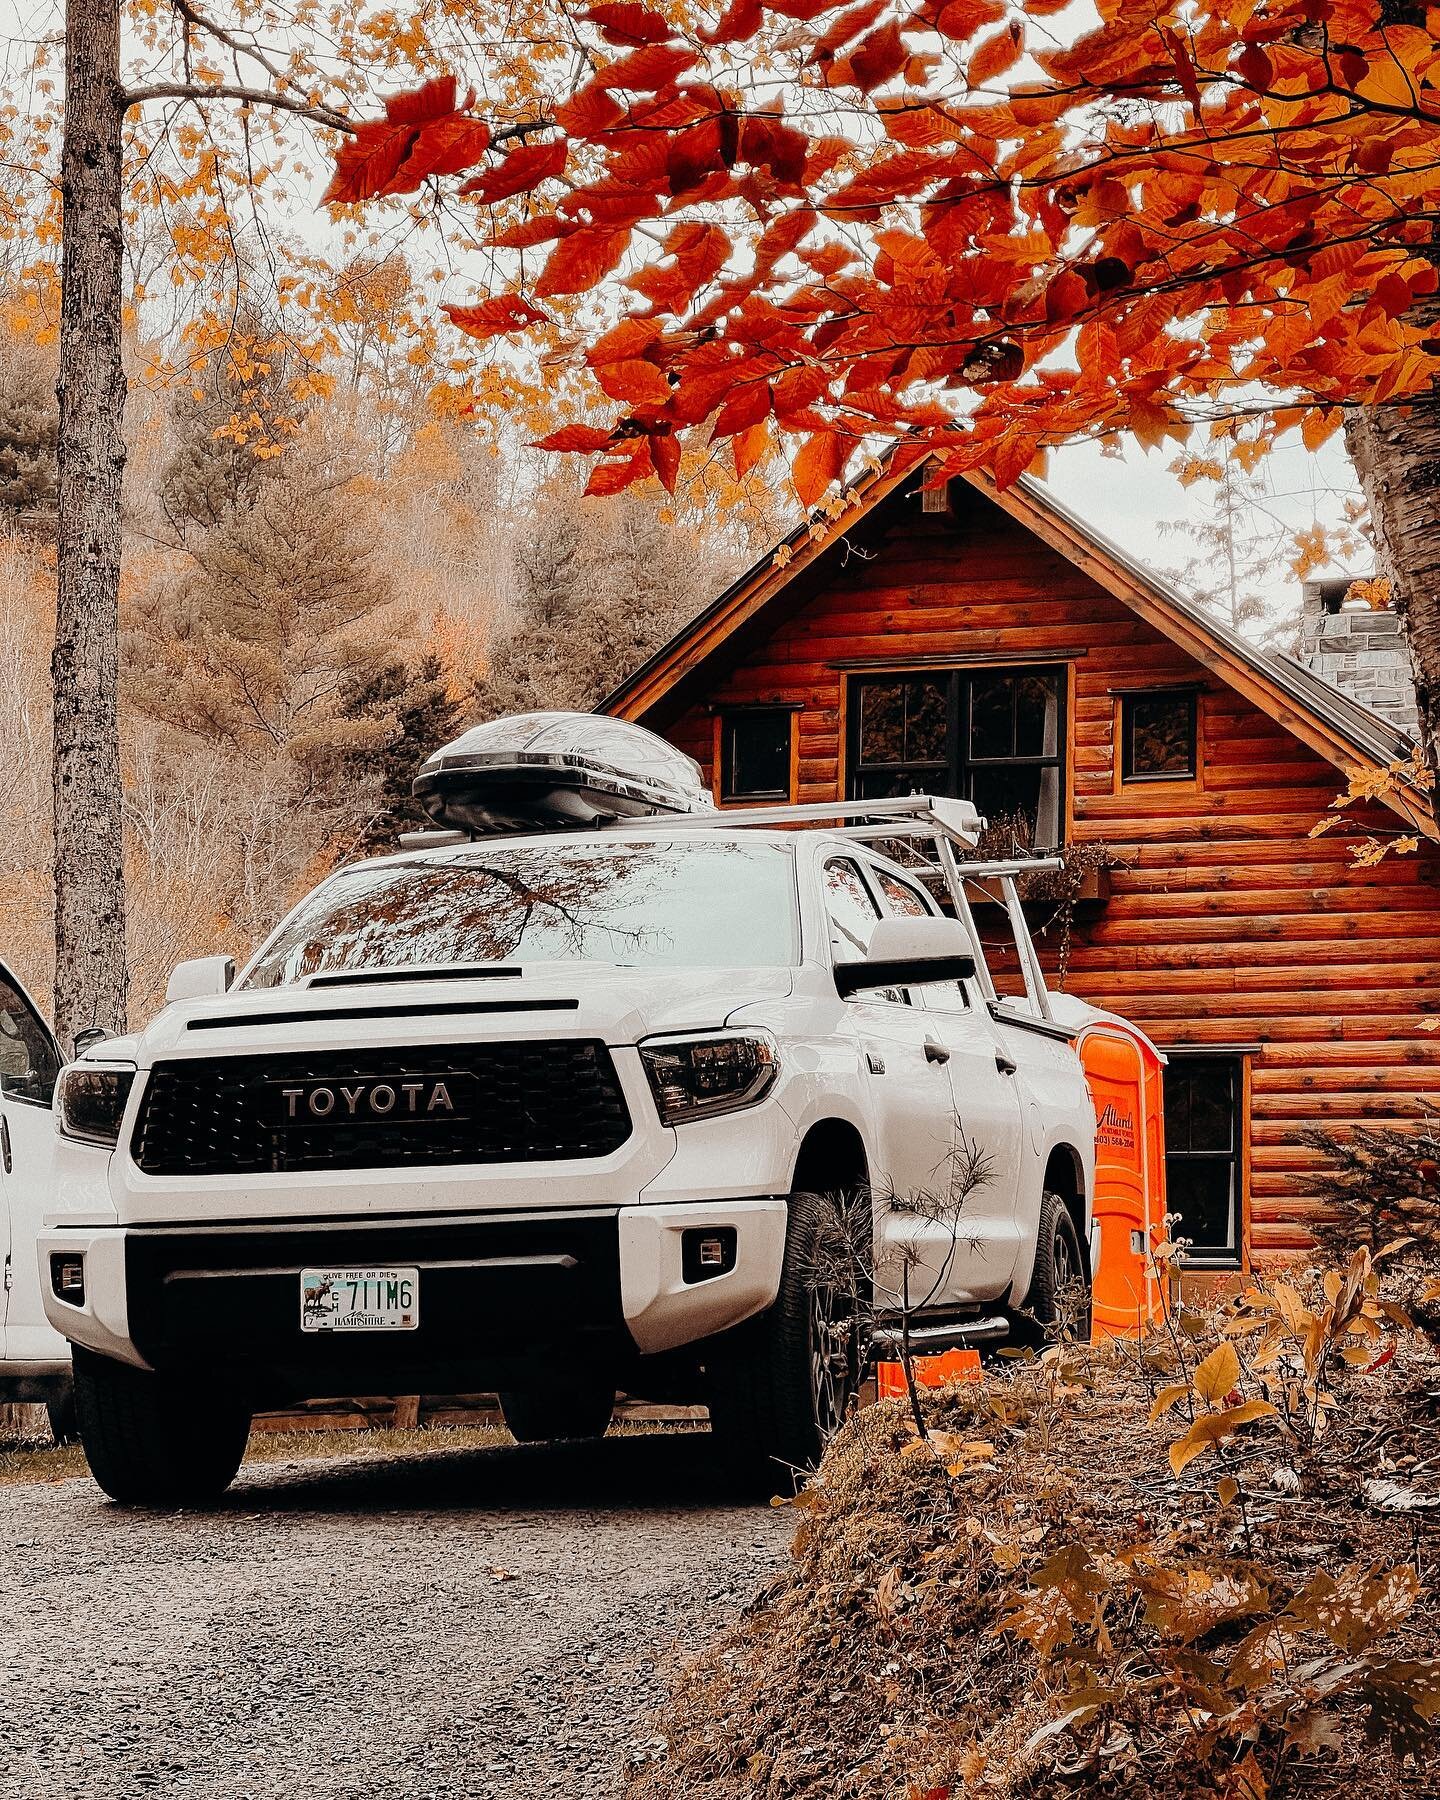 🍁 Best upper valley season = best construction season 🍁 

This site has the most stunning colors!

#uppervalley #heyuppervalley #upval #uppervalleyvtnh #generalcontractor #builders #mjtoonconstruction #woodstockvt